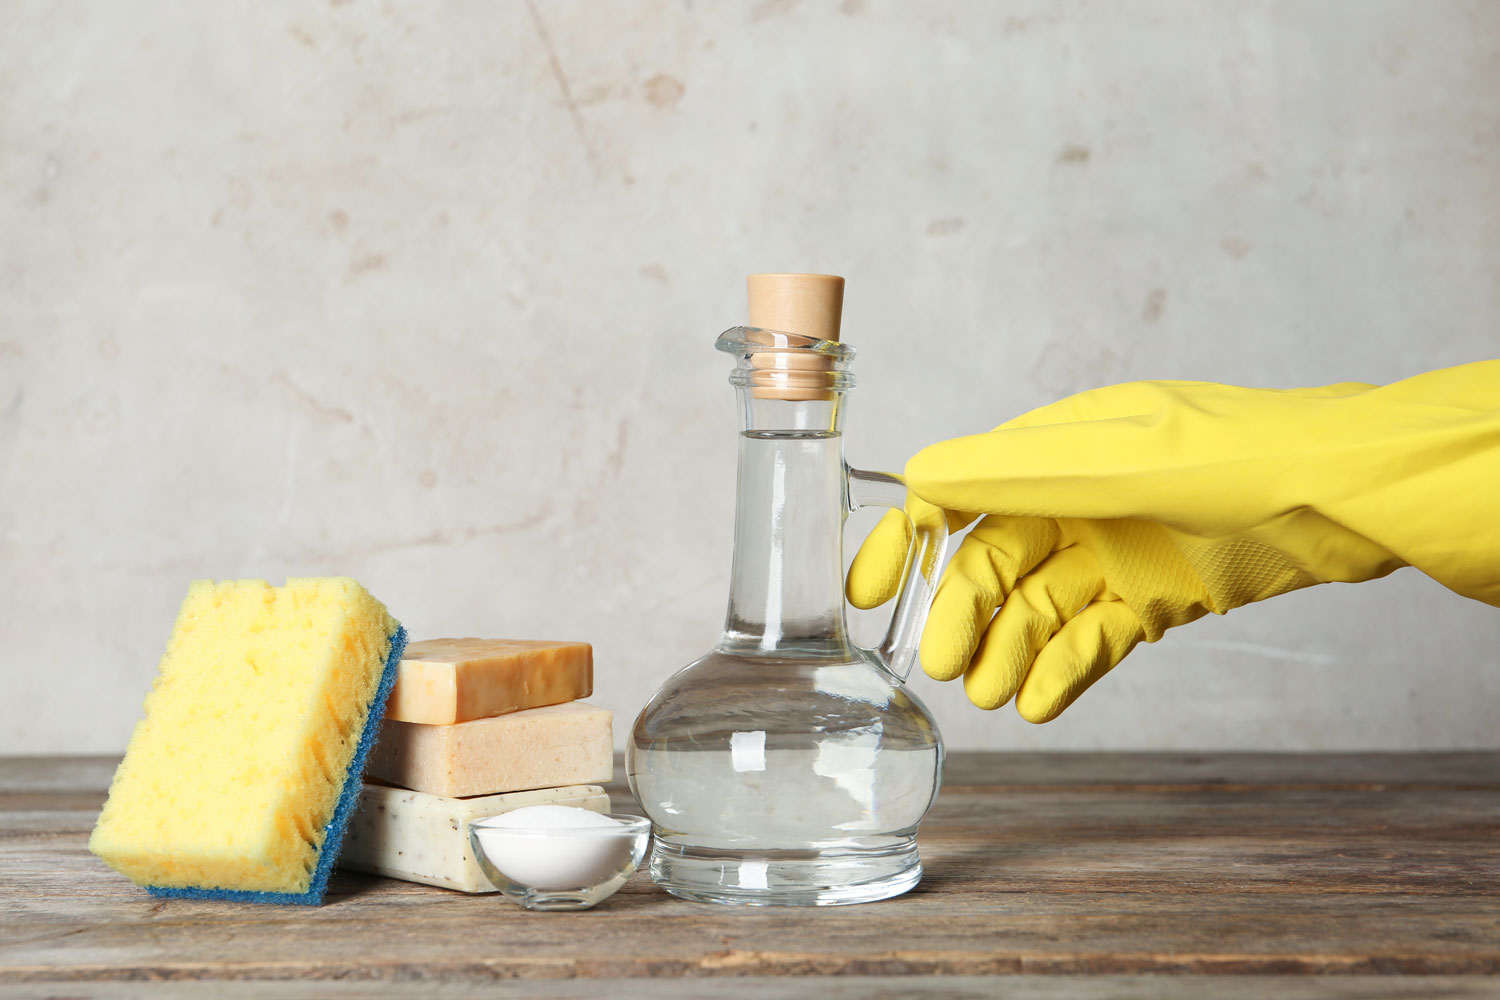 Mold Removal with Vinegar and Bleach